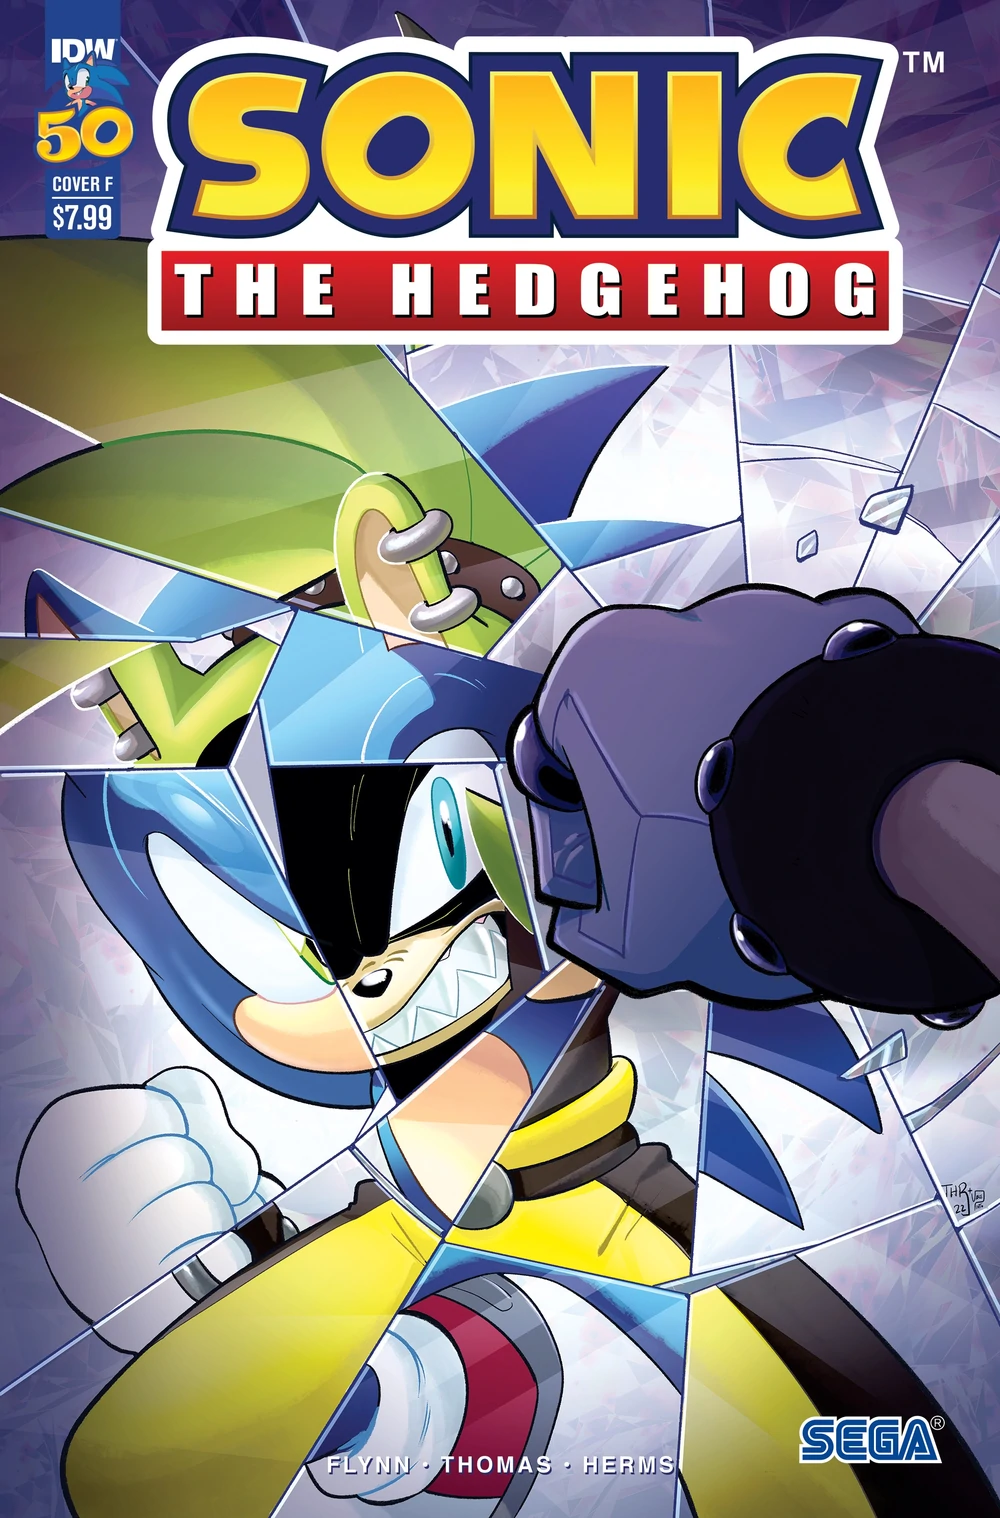 Sonic The Hedgehog #50 Cover F